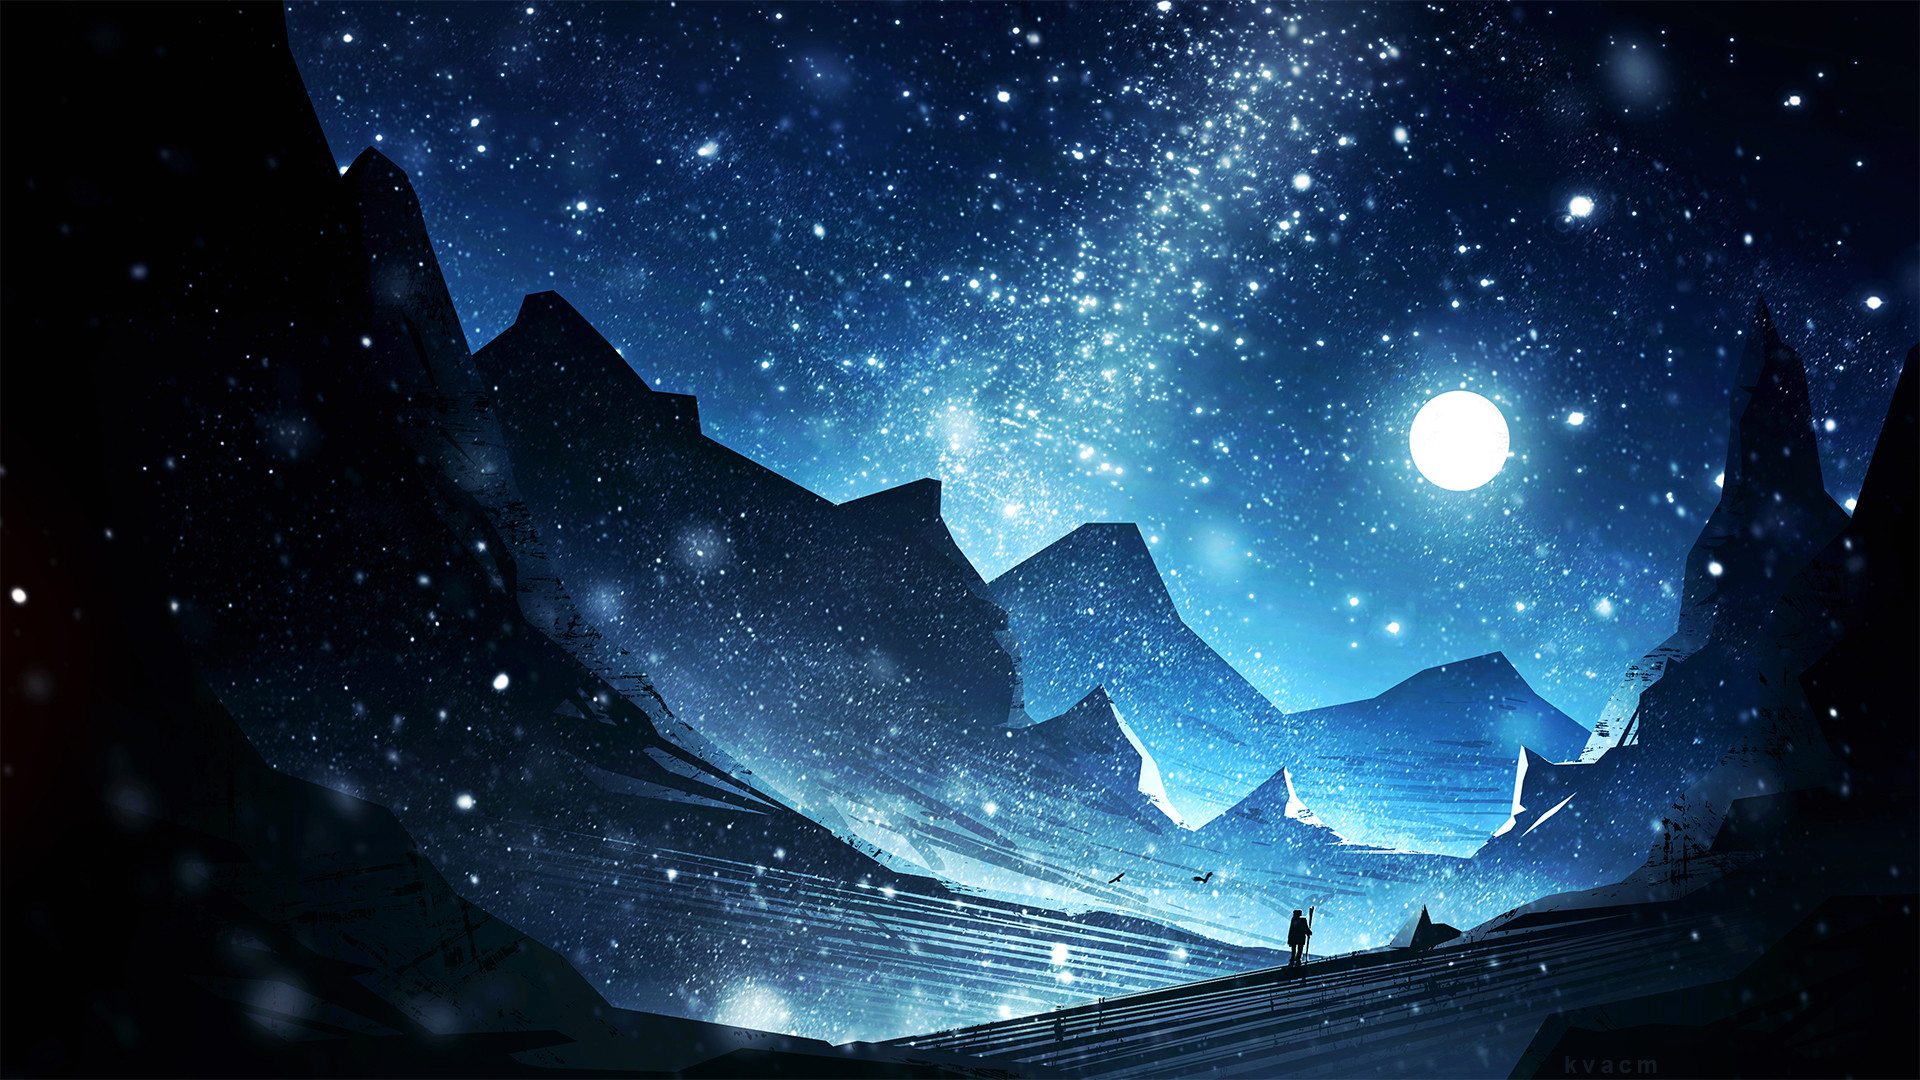 Digital Art Constellations Mountains Looking Into The Distance 1920x1080